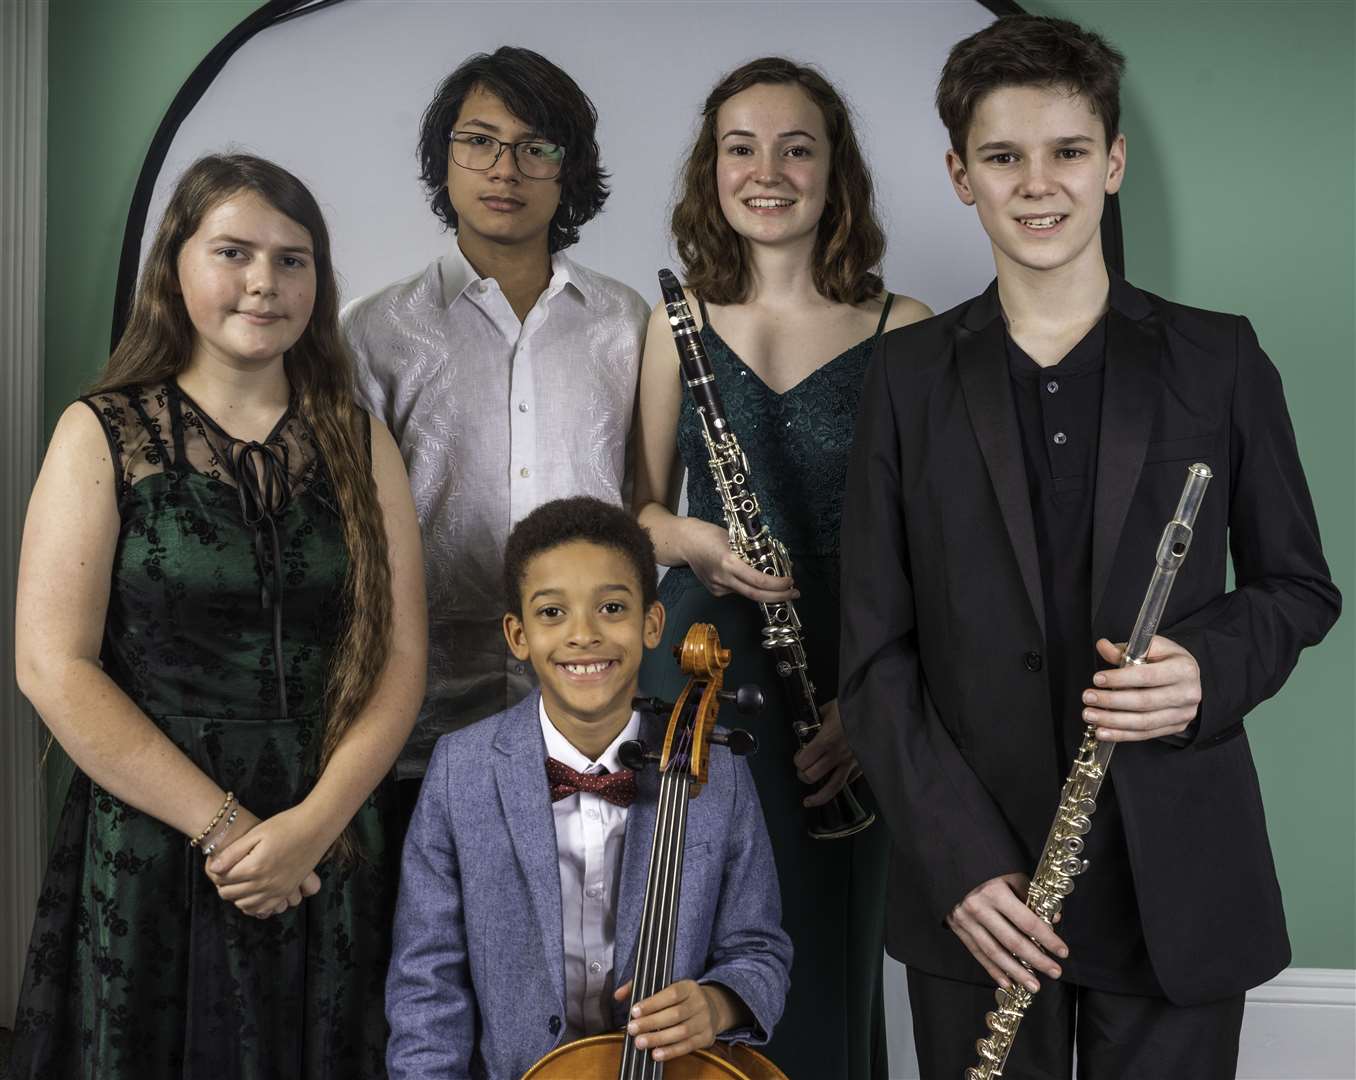 Some of this year's Young Musicians finalists: from left, Leonie Carrette, Ashley Solano, Oliver Moh, Siena Barr and Daniel Pengelly